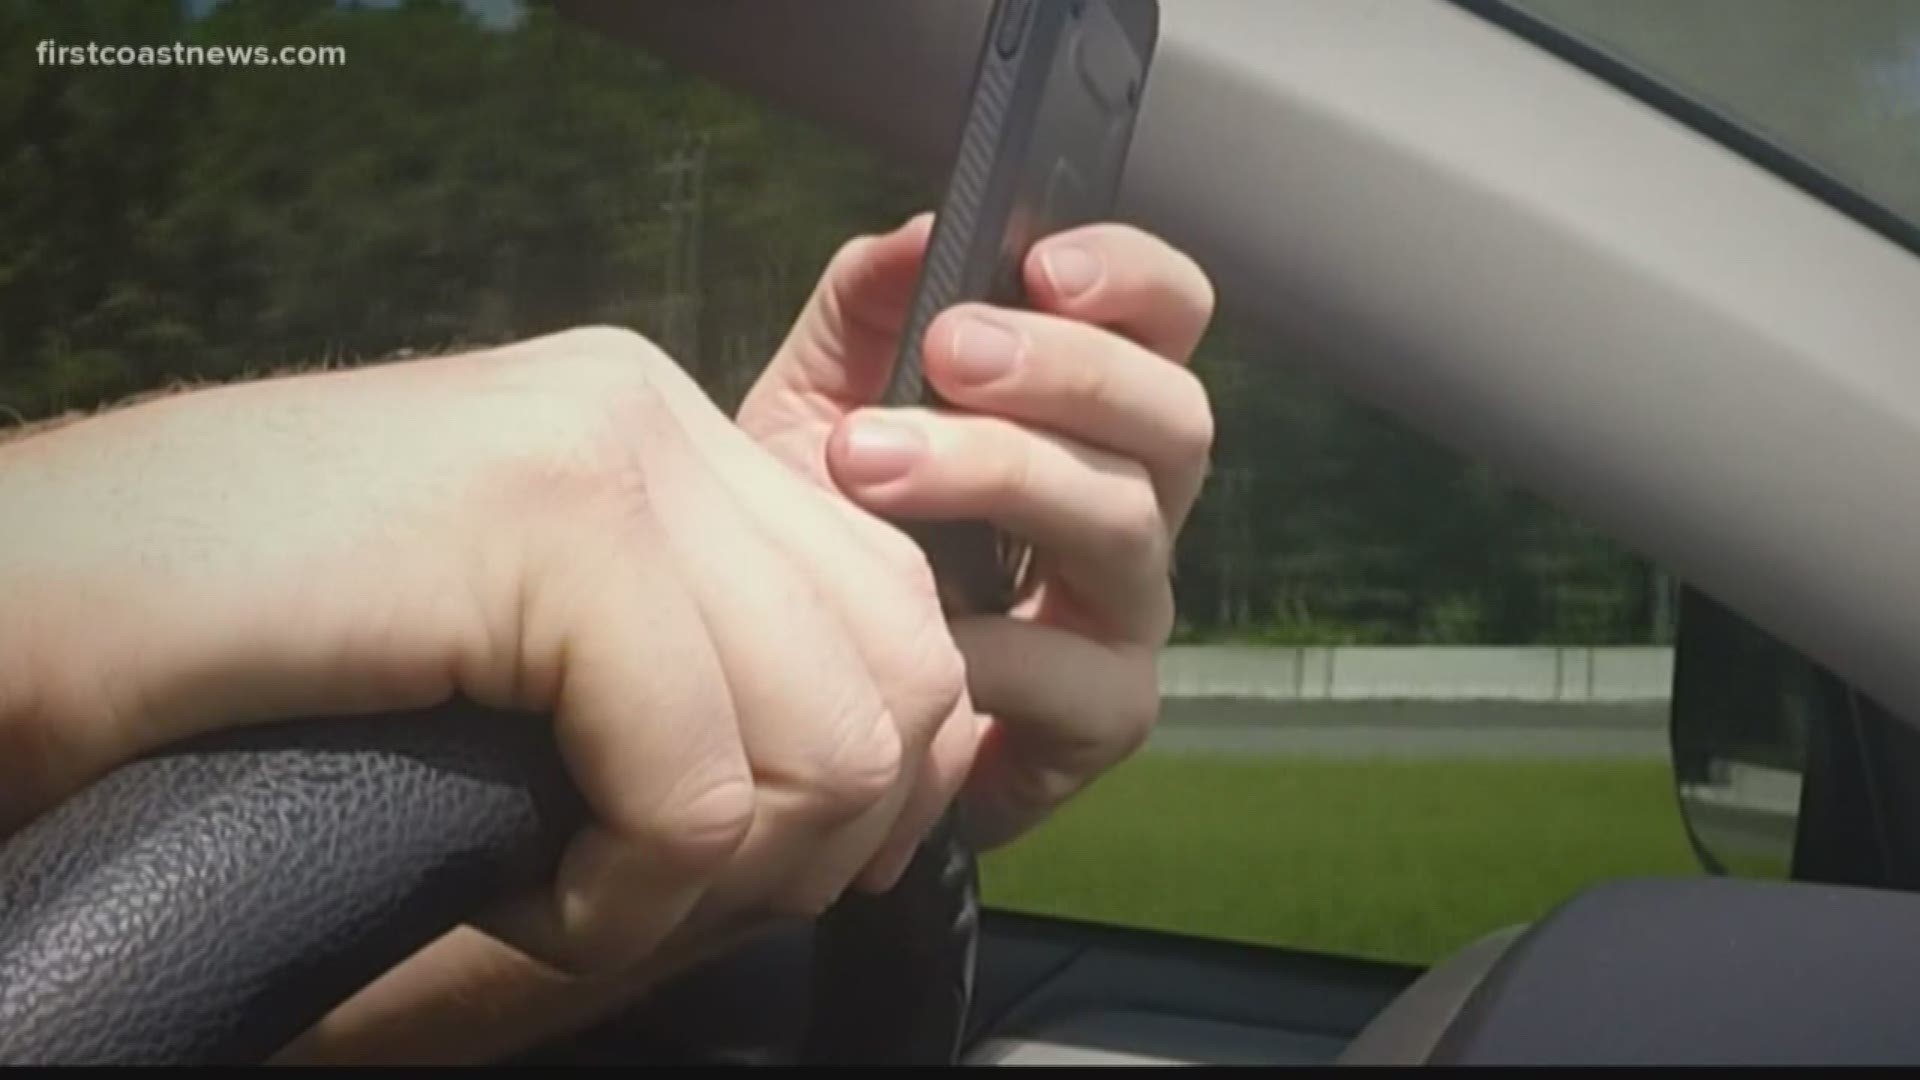 Local law enforcement agencies can start ticketing immediately on July 1, however, Florida Highway Patrol says they won't start ticketing just yet. FHP says their troopers will be giving out warnings until January 1, 2020, to educate drivers on the new law.